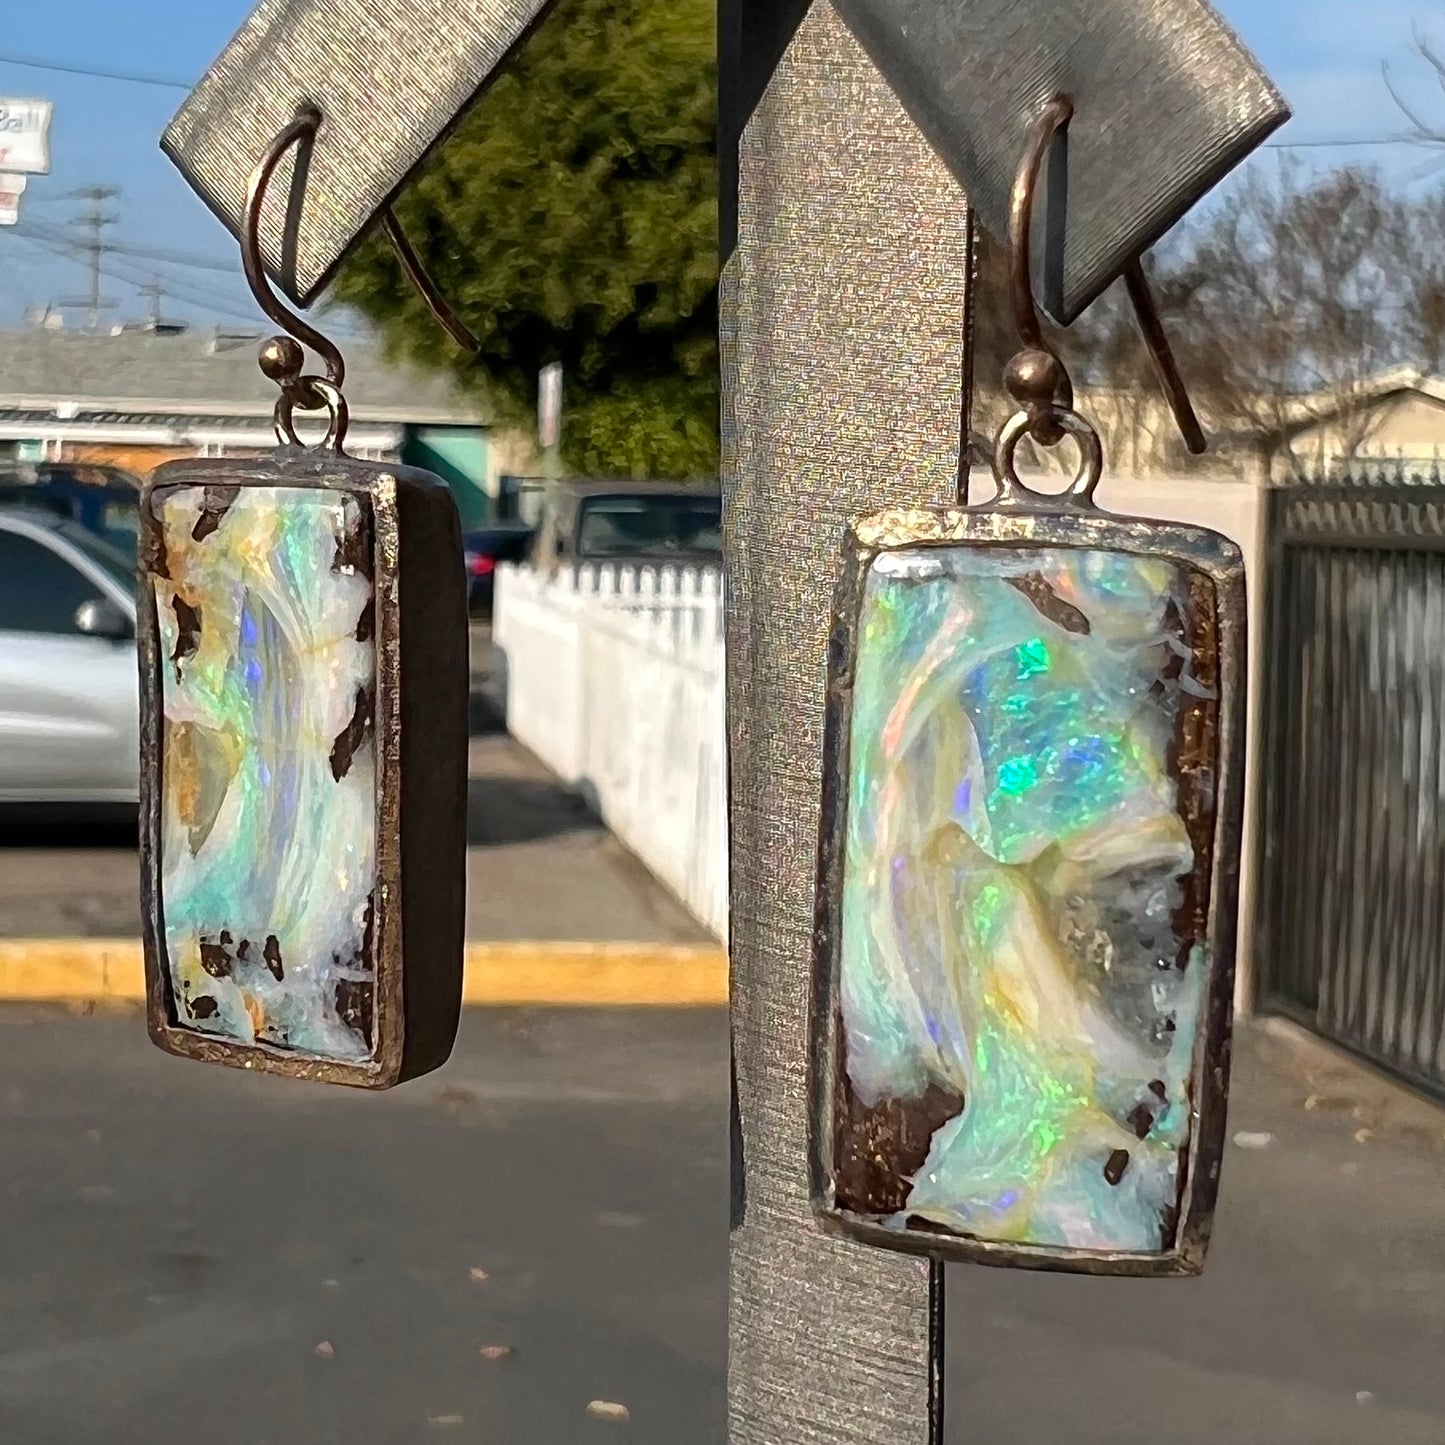 A pair of handmade sterling silver boulder opal earrings.  The earrings dangle from French wire hooks.